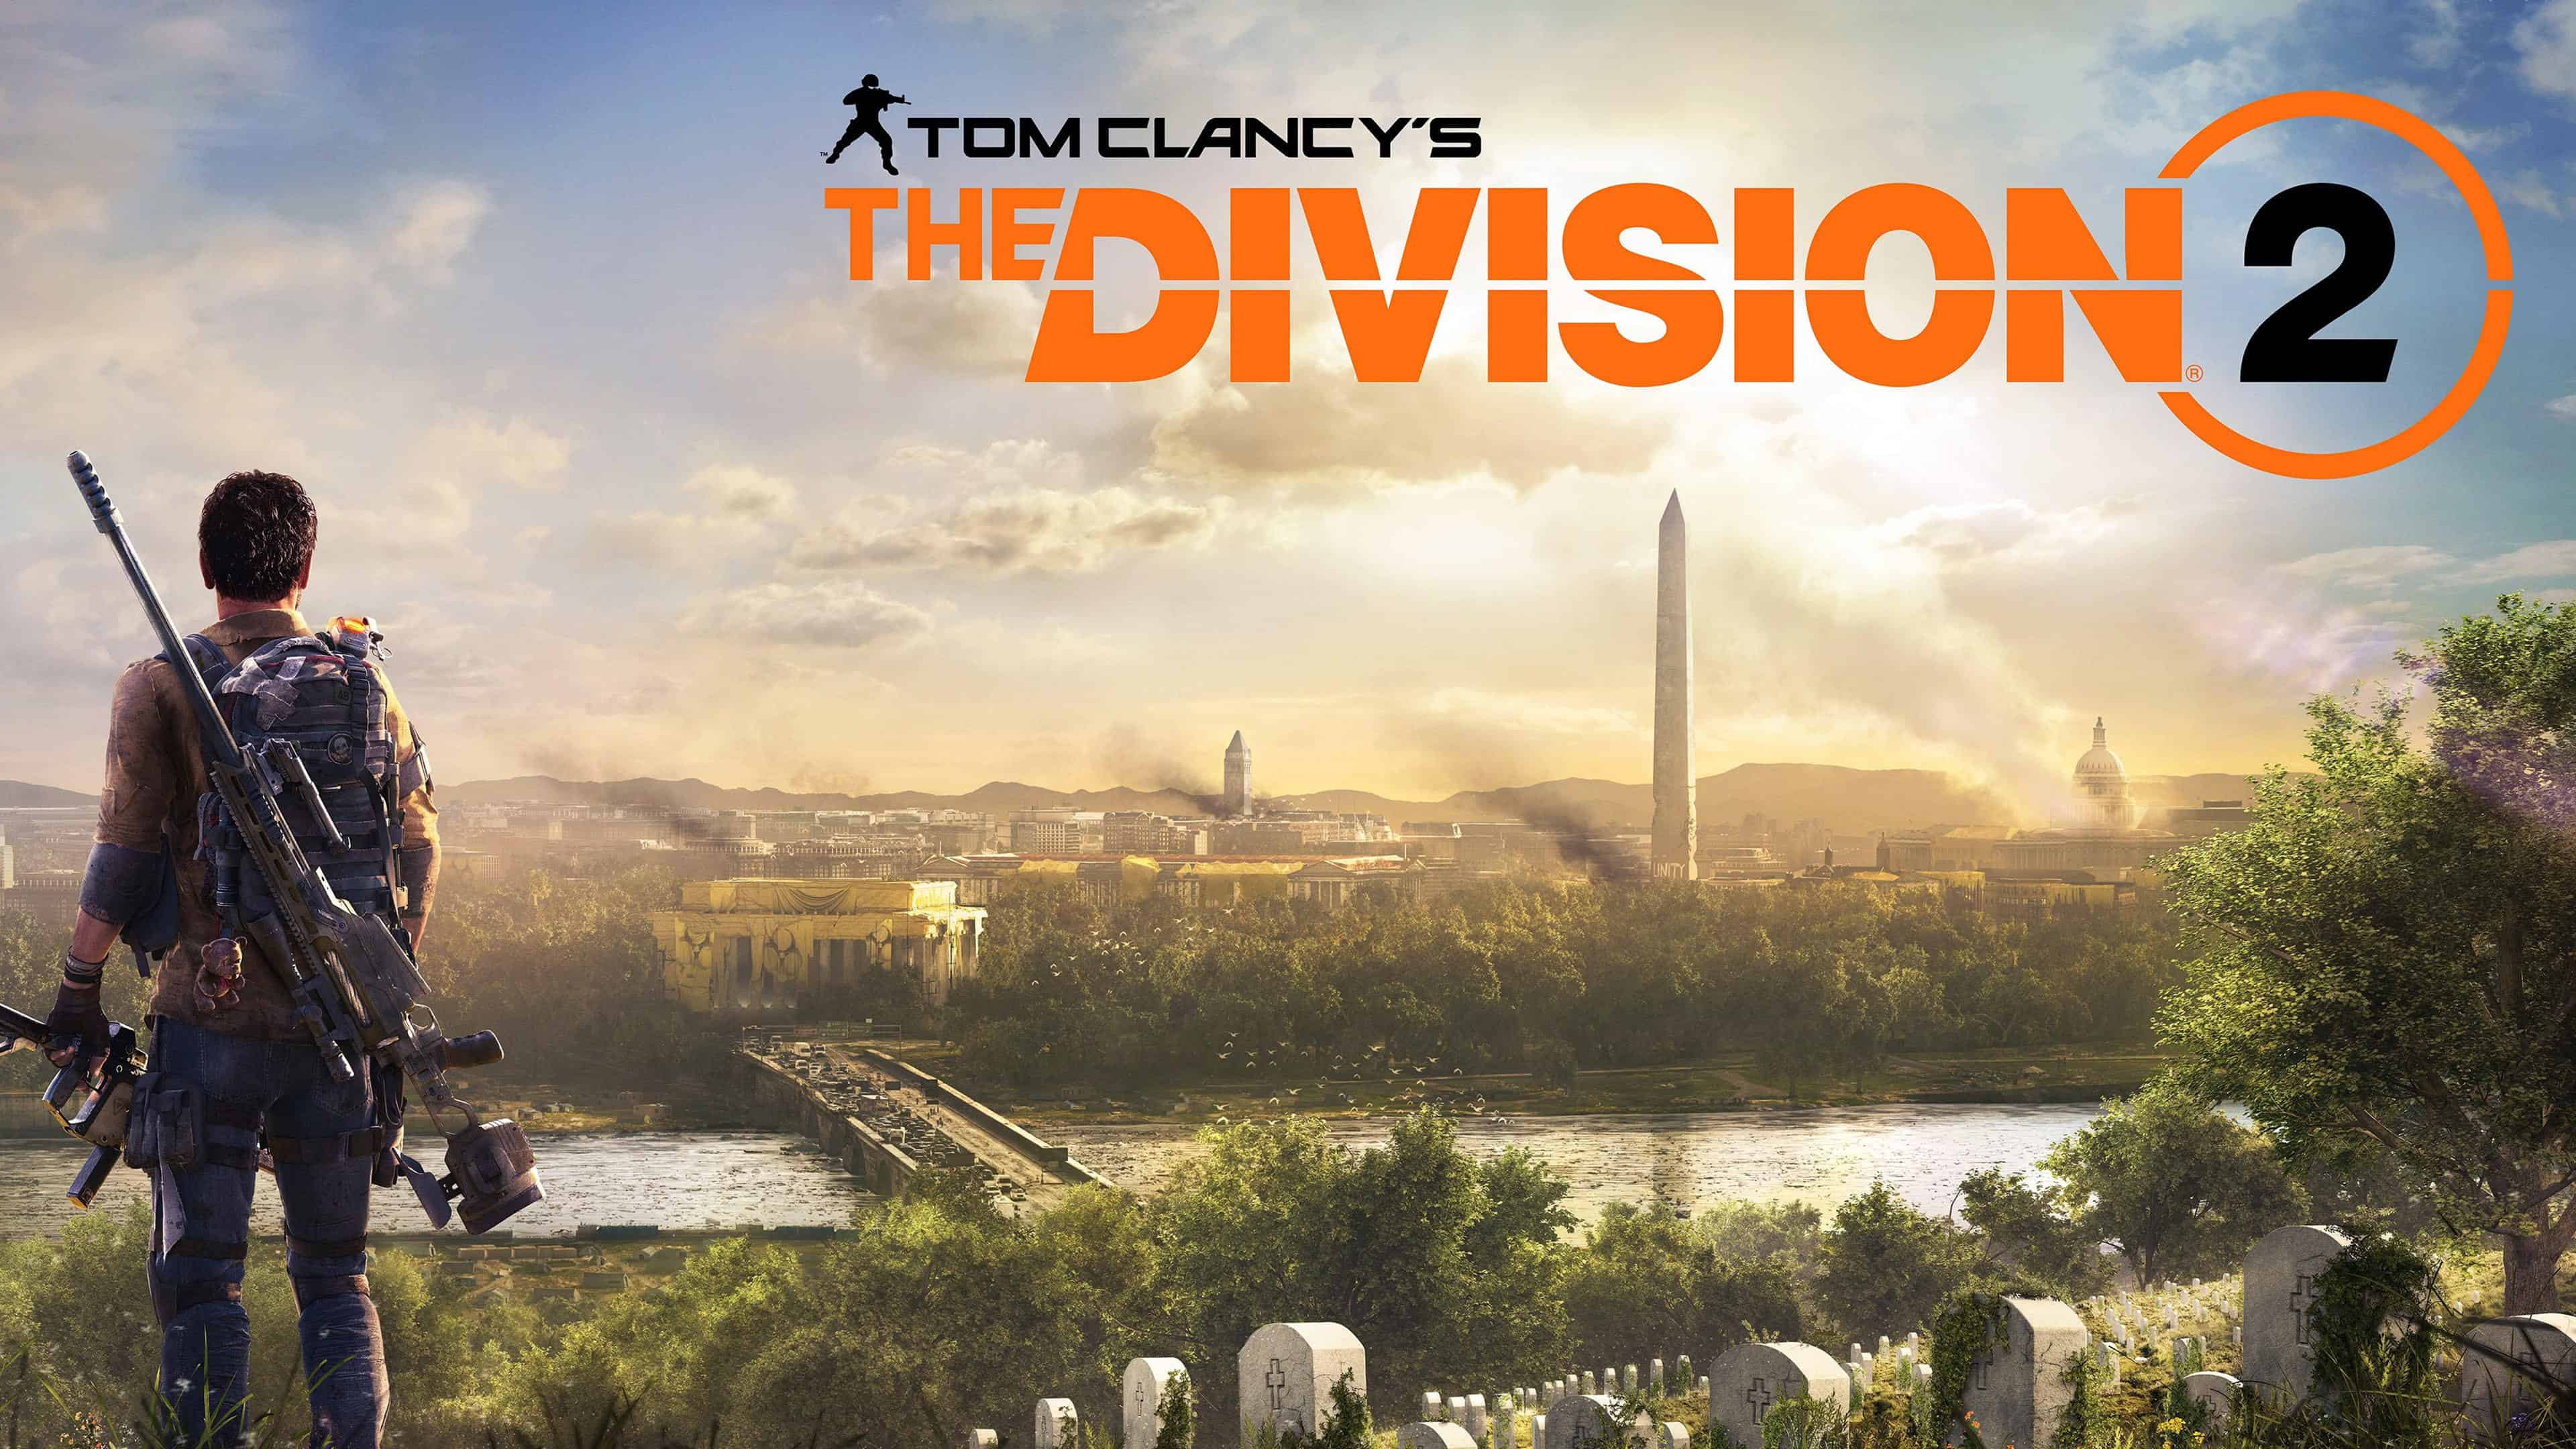 Tom Clancys The Division 2 Wallpapers Wallpaper Cave 4789